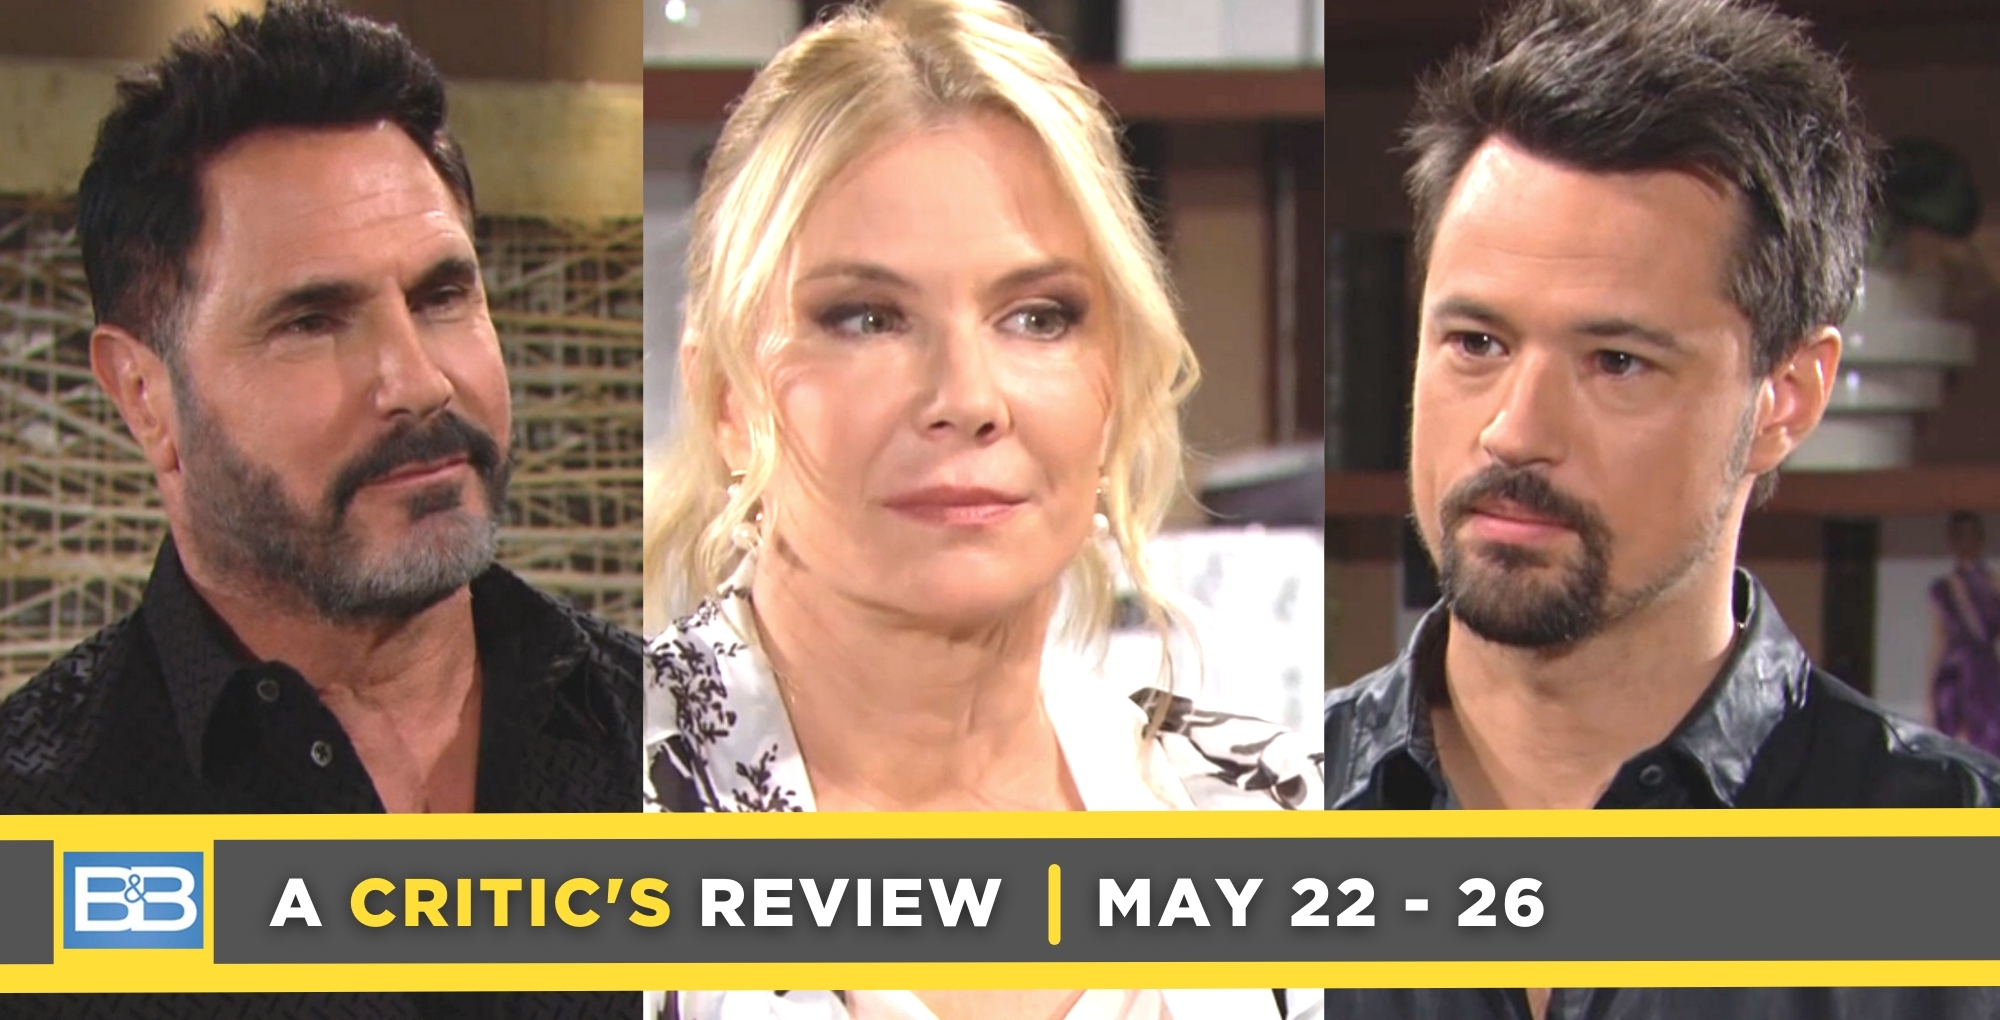 the bold and the beautiful critic's review for may 22 – may 26, 2023, three images bill, brooke, and thomas.